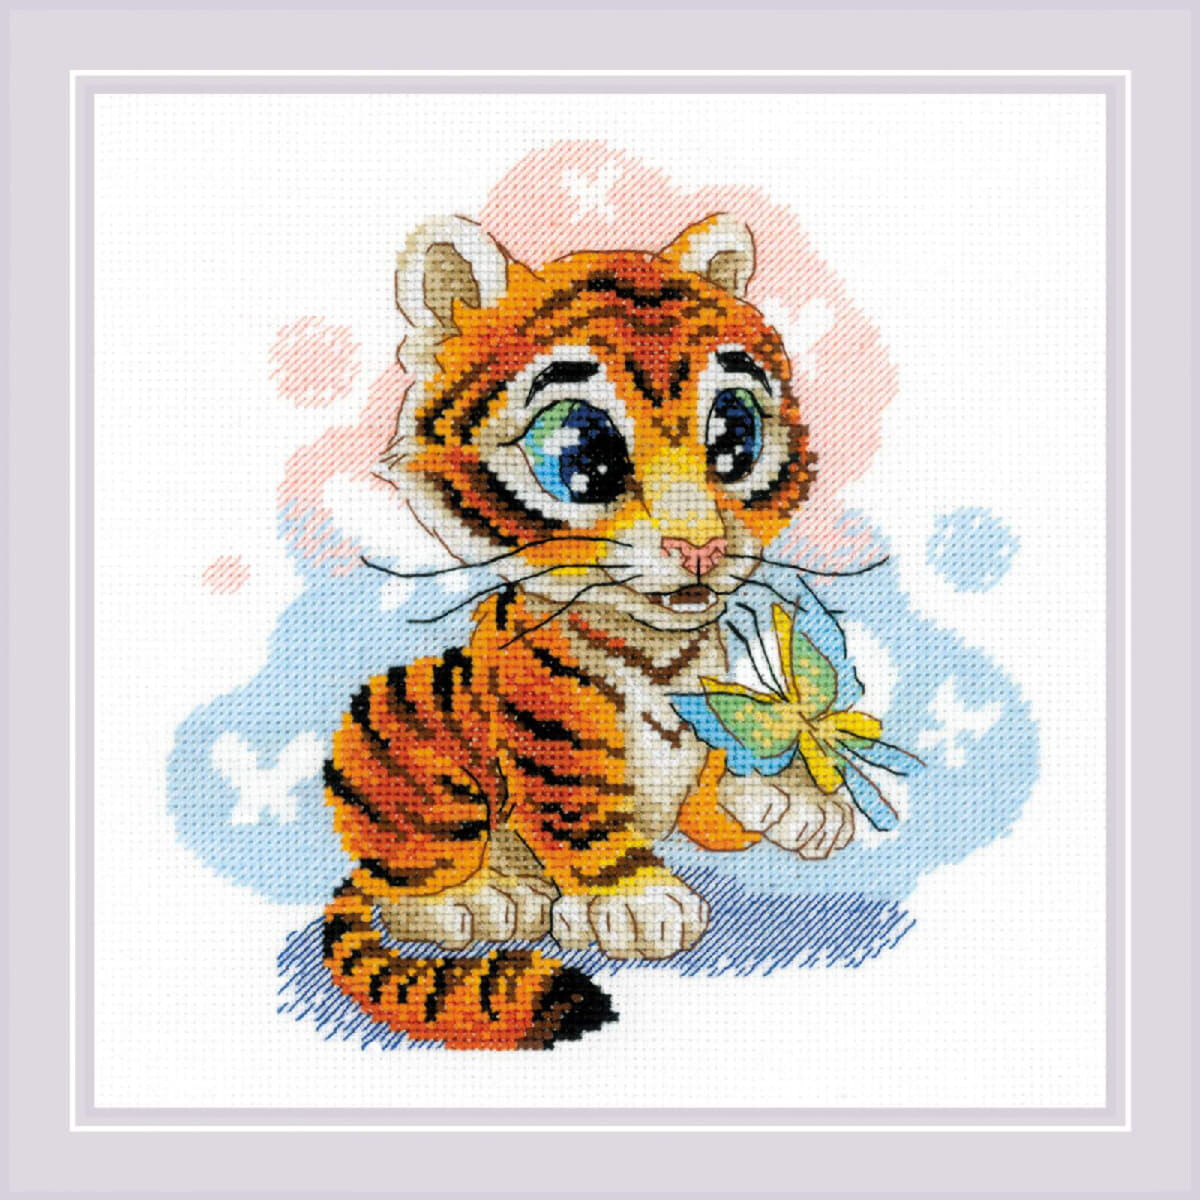 Riolis counted cross stitch kit "Curious Little...